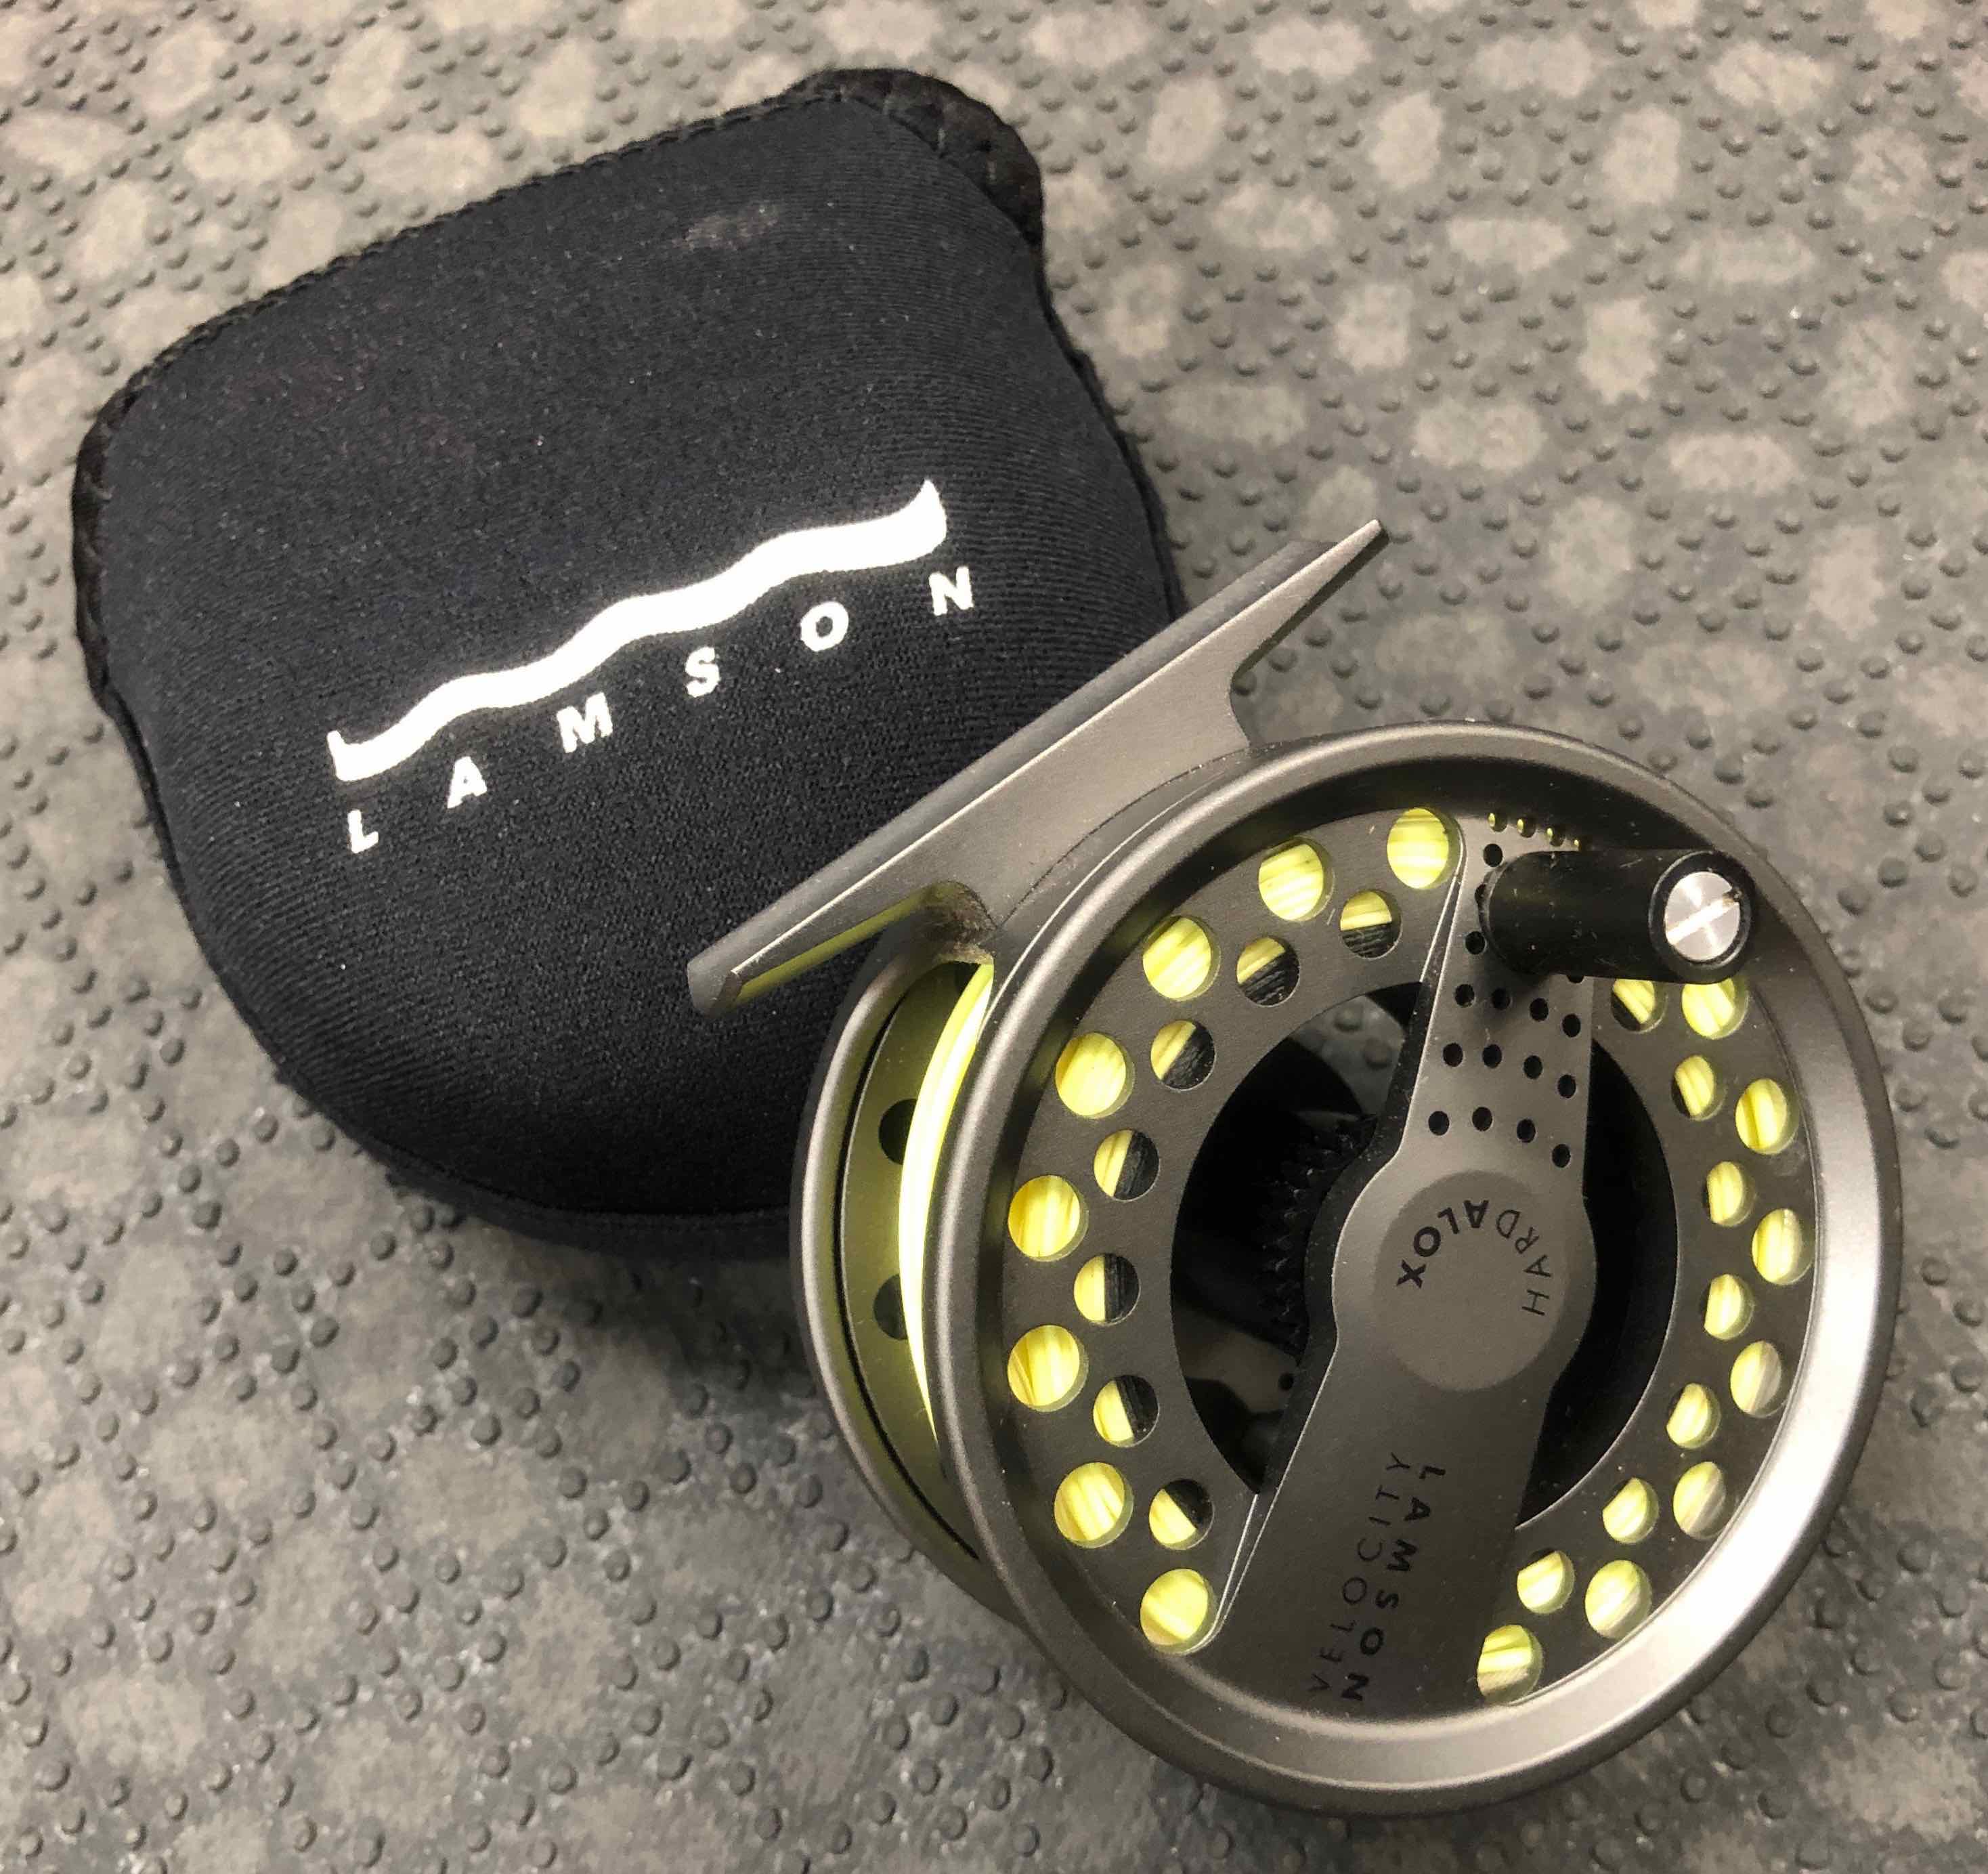 https://thefirstcast.ca/wp-content/uploads/2019/09/Lamson-Velocity-Fly-reel-and-Fly-Line-BB.jpg